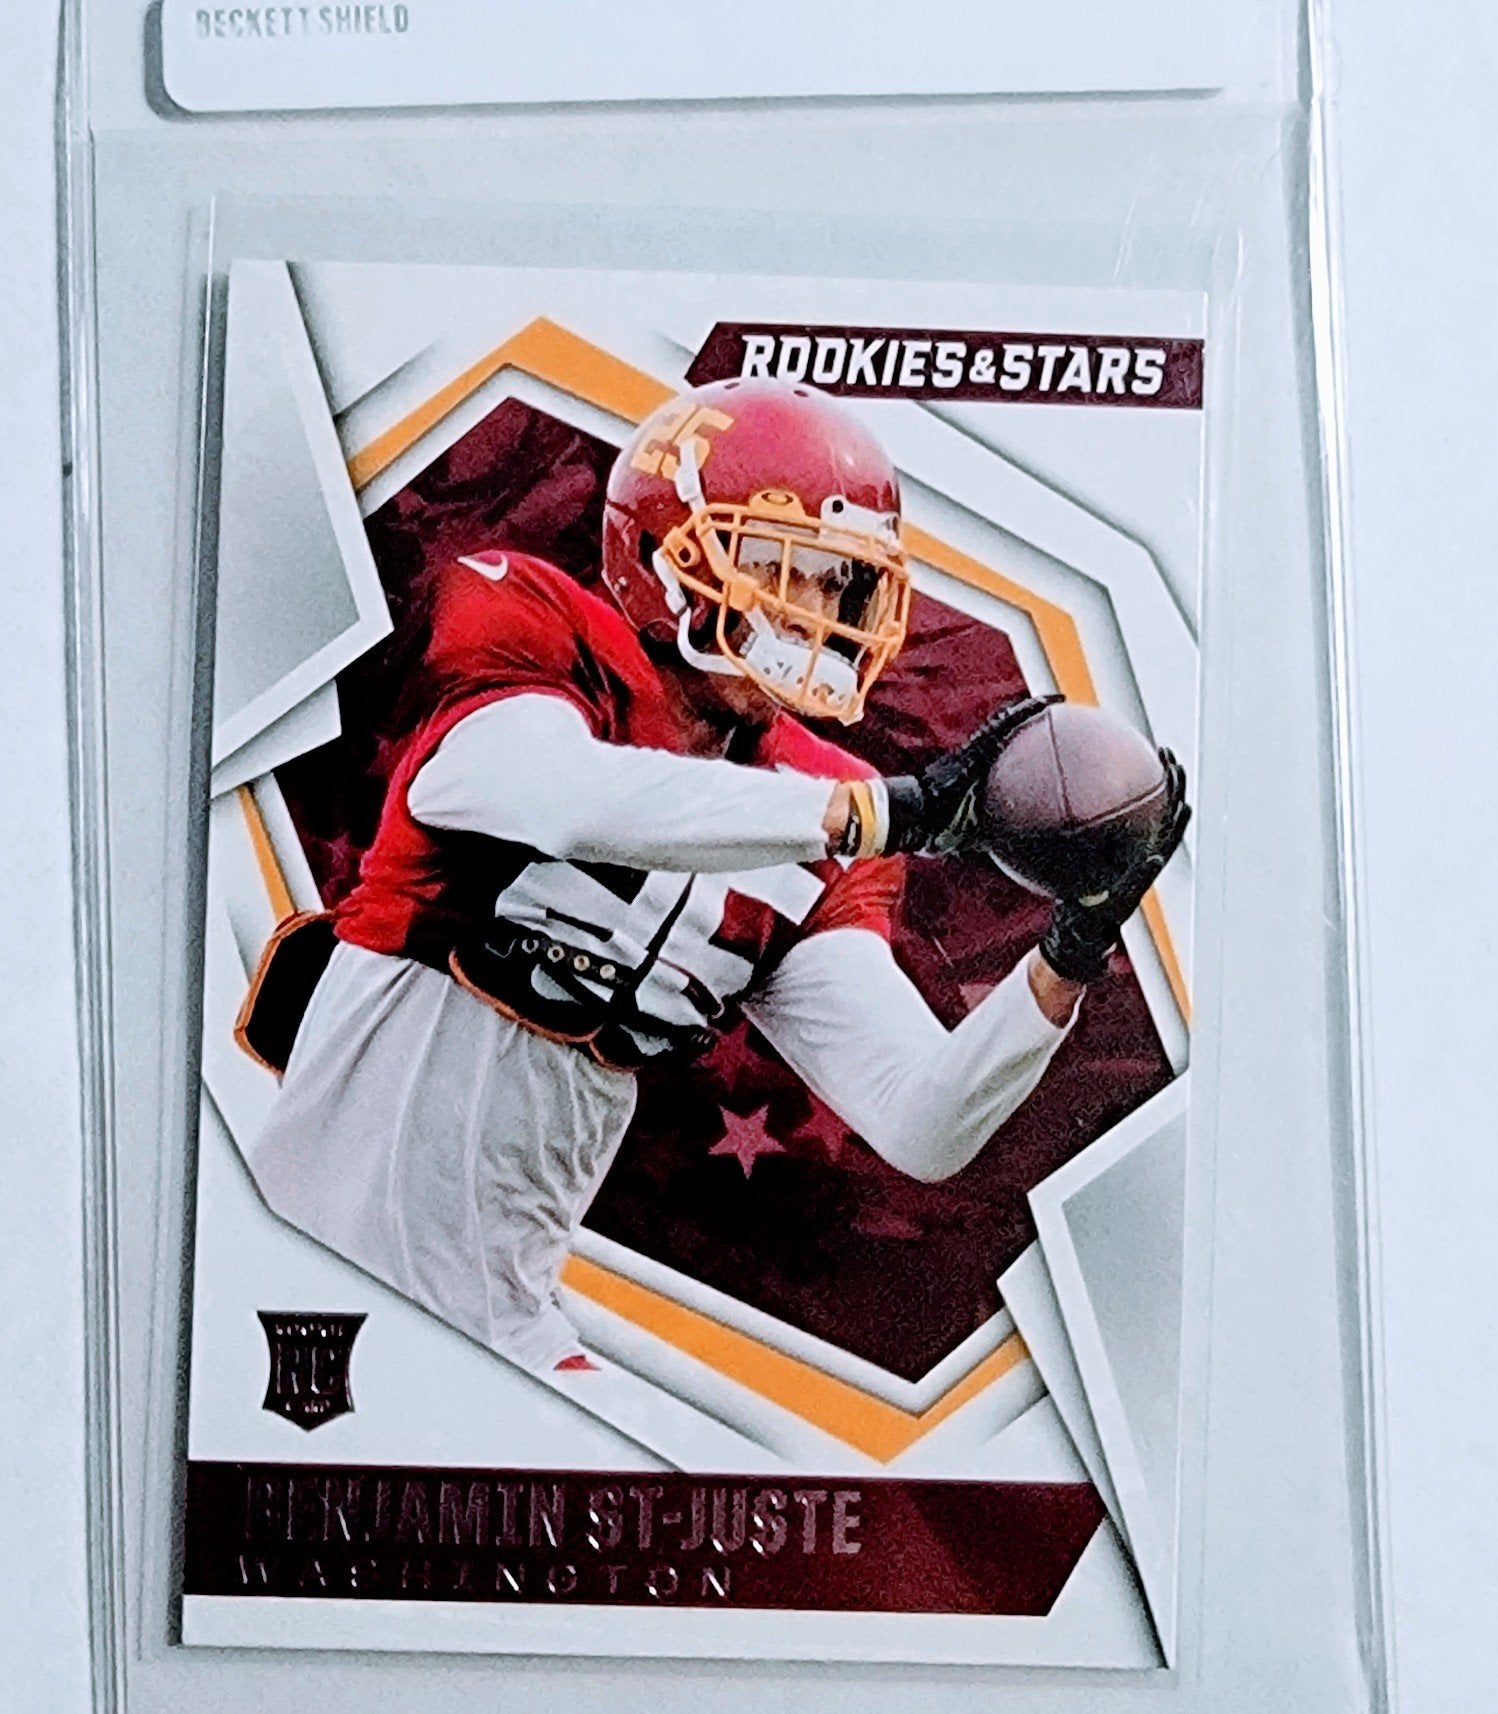 2021 Panini Rookies and Stars Benjamin St-juste Star Rookie Football Card AVM1 simple Xclusive Collectibles   